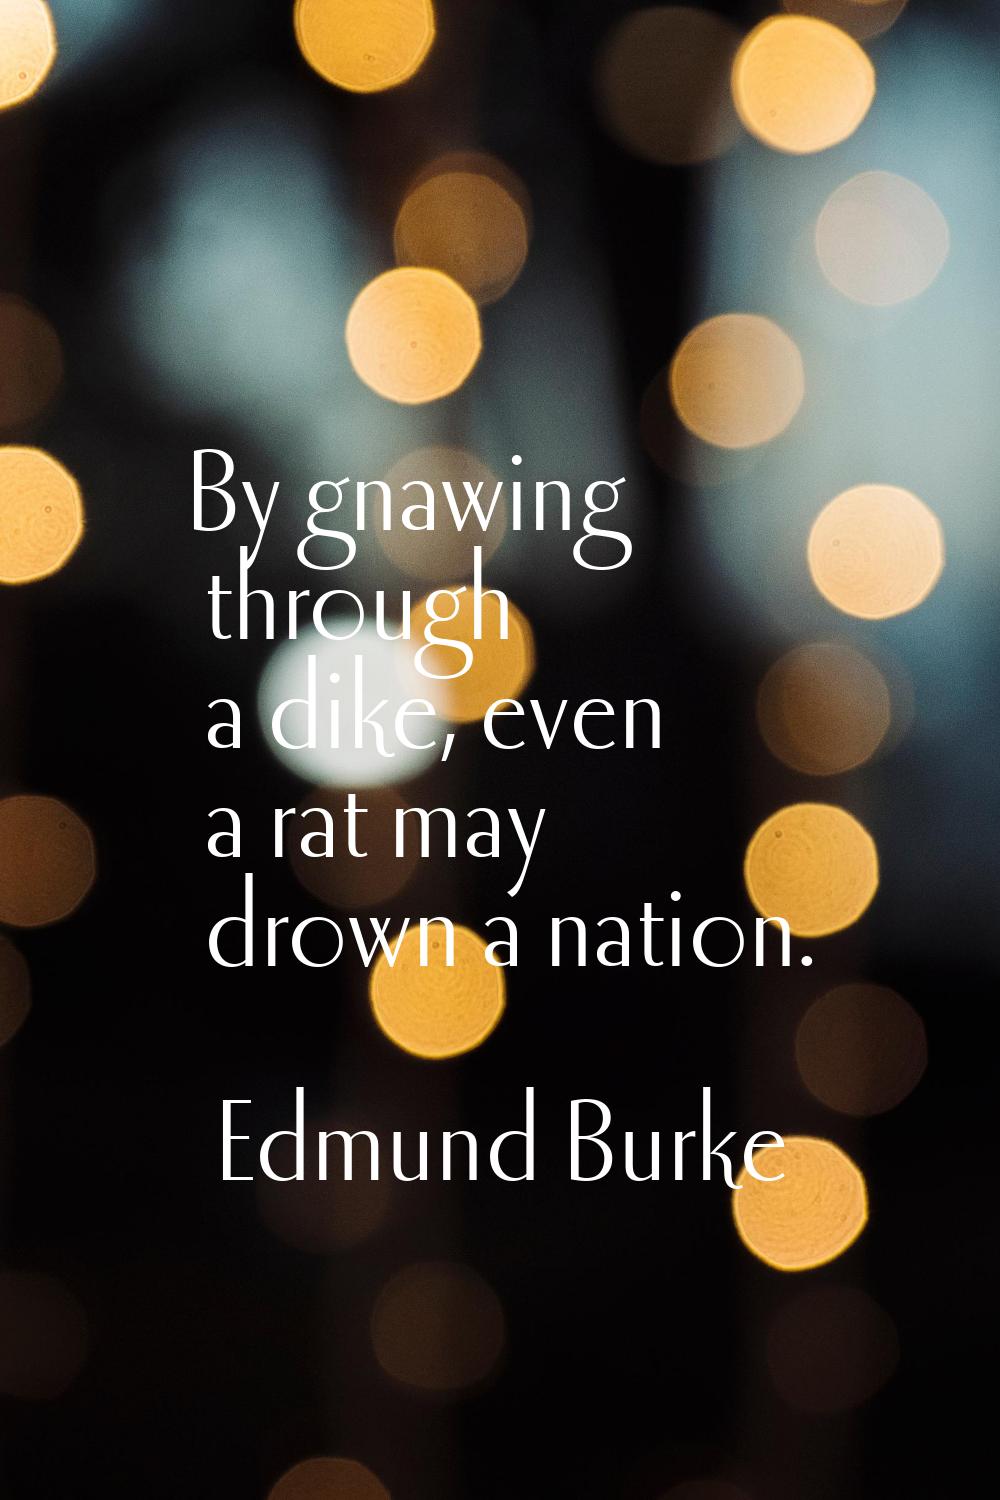 By gnawing through a dike, even a rat may drown a nation.